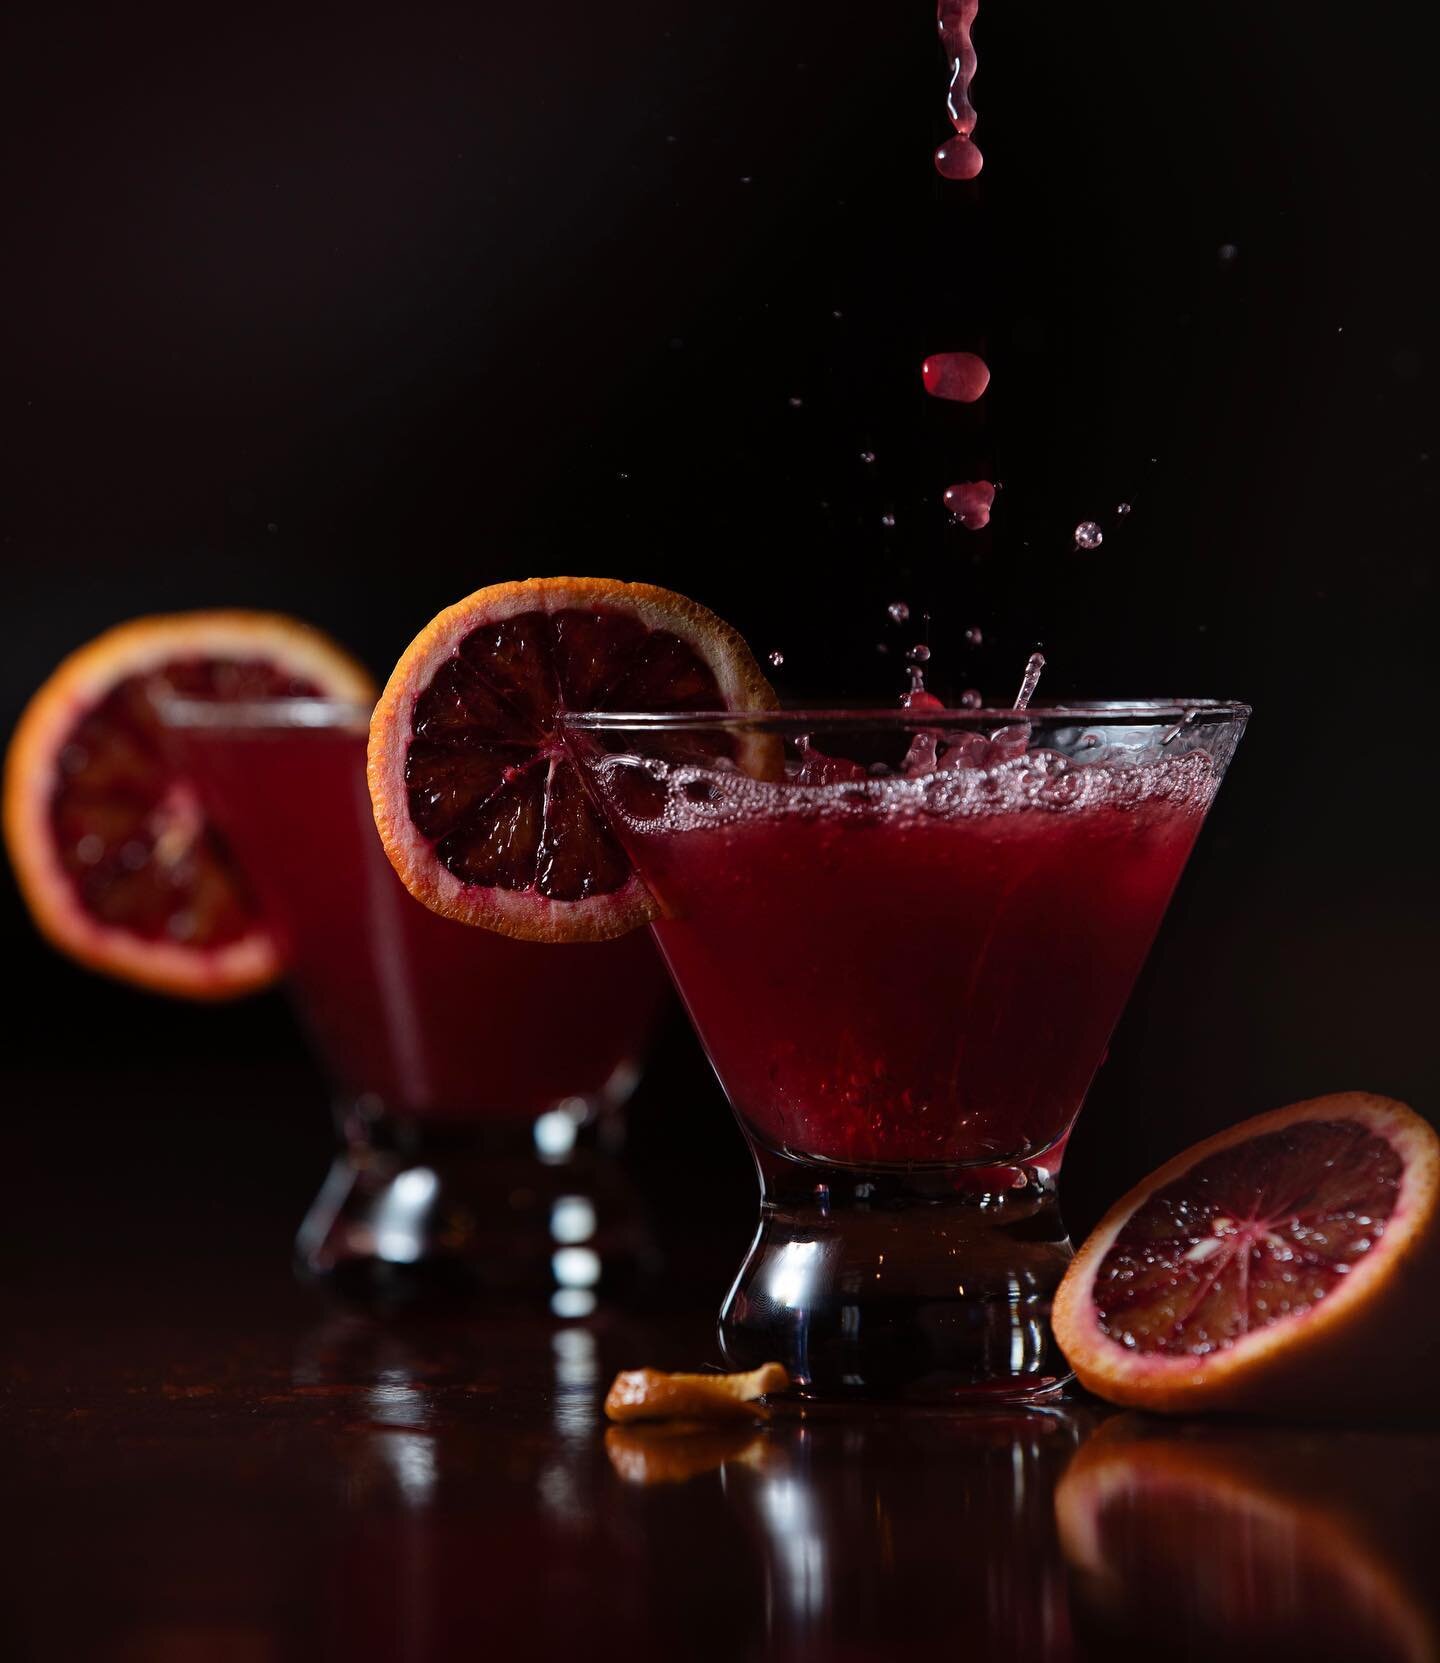 Loved working on this #BloodOrange #Martini from @salute_ristorante! Eve created quite a drink! You can get the #recipe in the #february issue of @bclmag ! It&rsquo;s always an honor to see your work on the #cover of a #magazine!! 

#foodstyling #foo